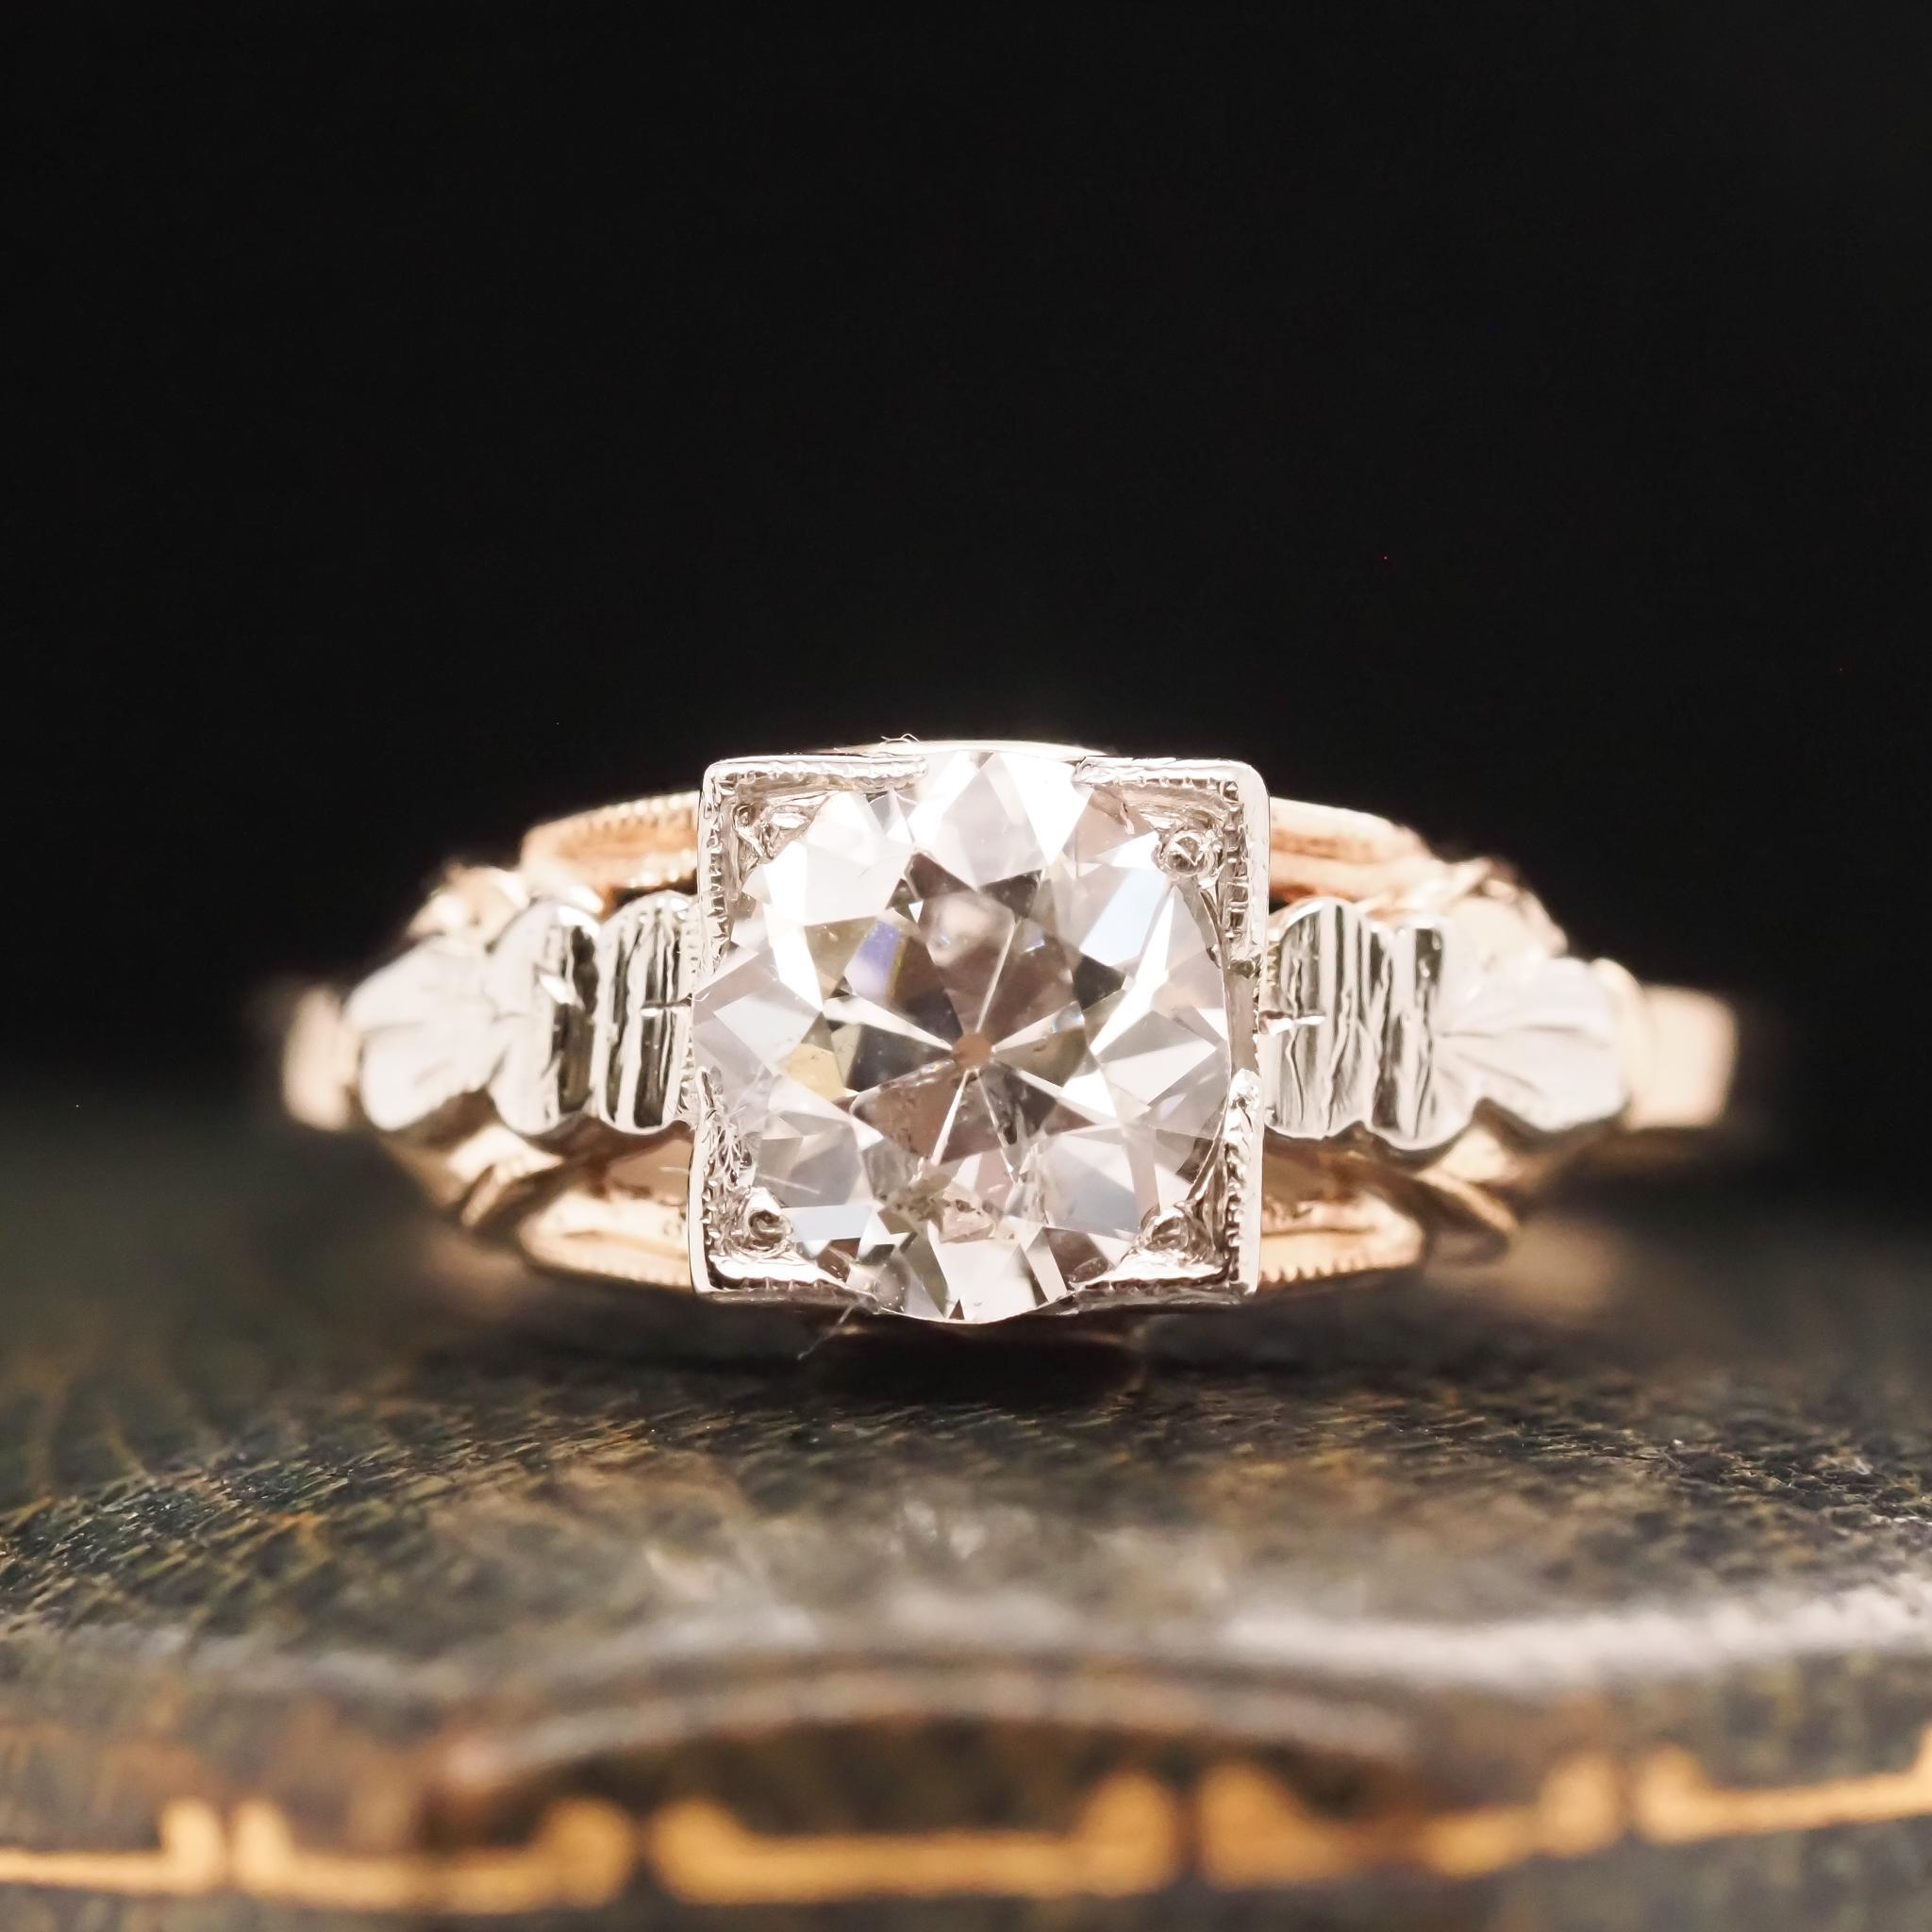 Year: 1900s
Item Details:
Ring Size: 7.25 (Sizable)
Metal Type: 14K Yellow Gold [Hallmarked, and Tested]
Weight: 2.2 grams
Diamond Details: 1.08ct, Old European Brilliant, I Color, I1 Clarity, Natural Diamond
Band Width: 1.7mm
Condition: